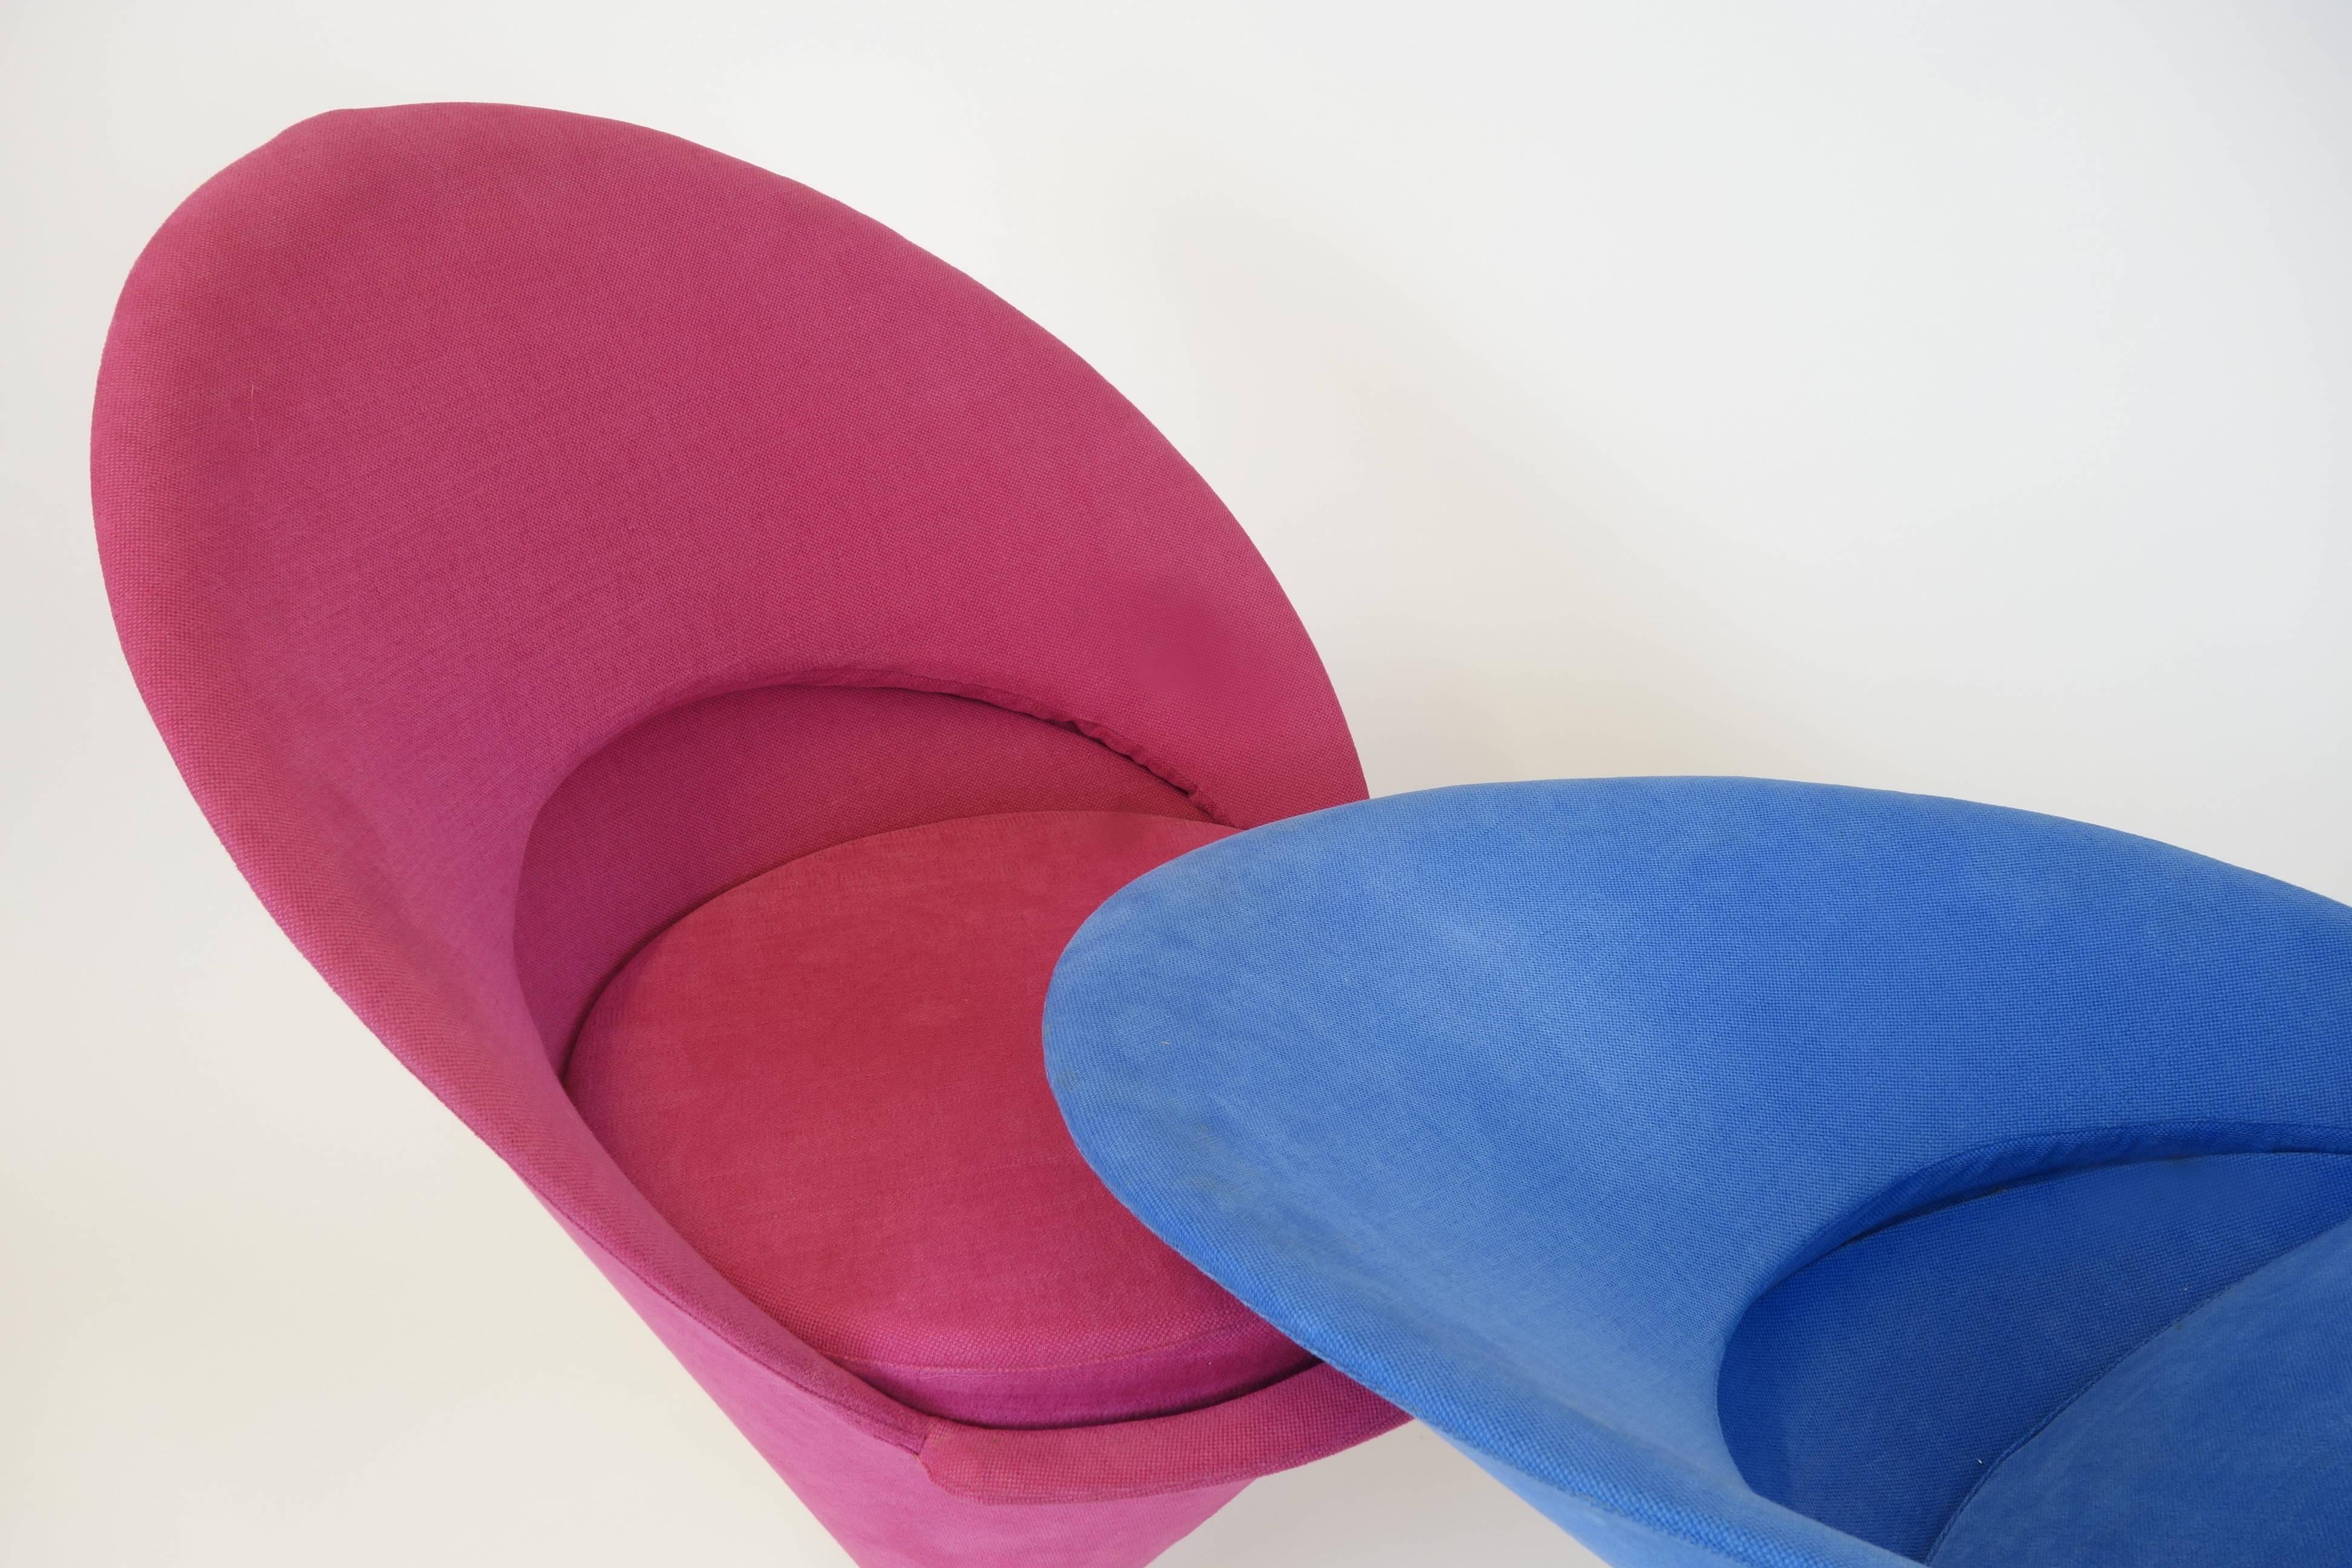 Mid-20th Century Original K1 Cone Chairs Design Blue Red by Verner Panton, Denmark, 1950s For Sale